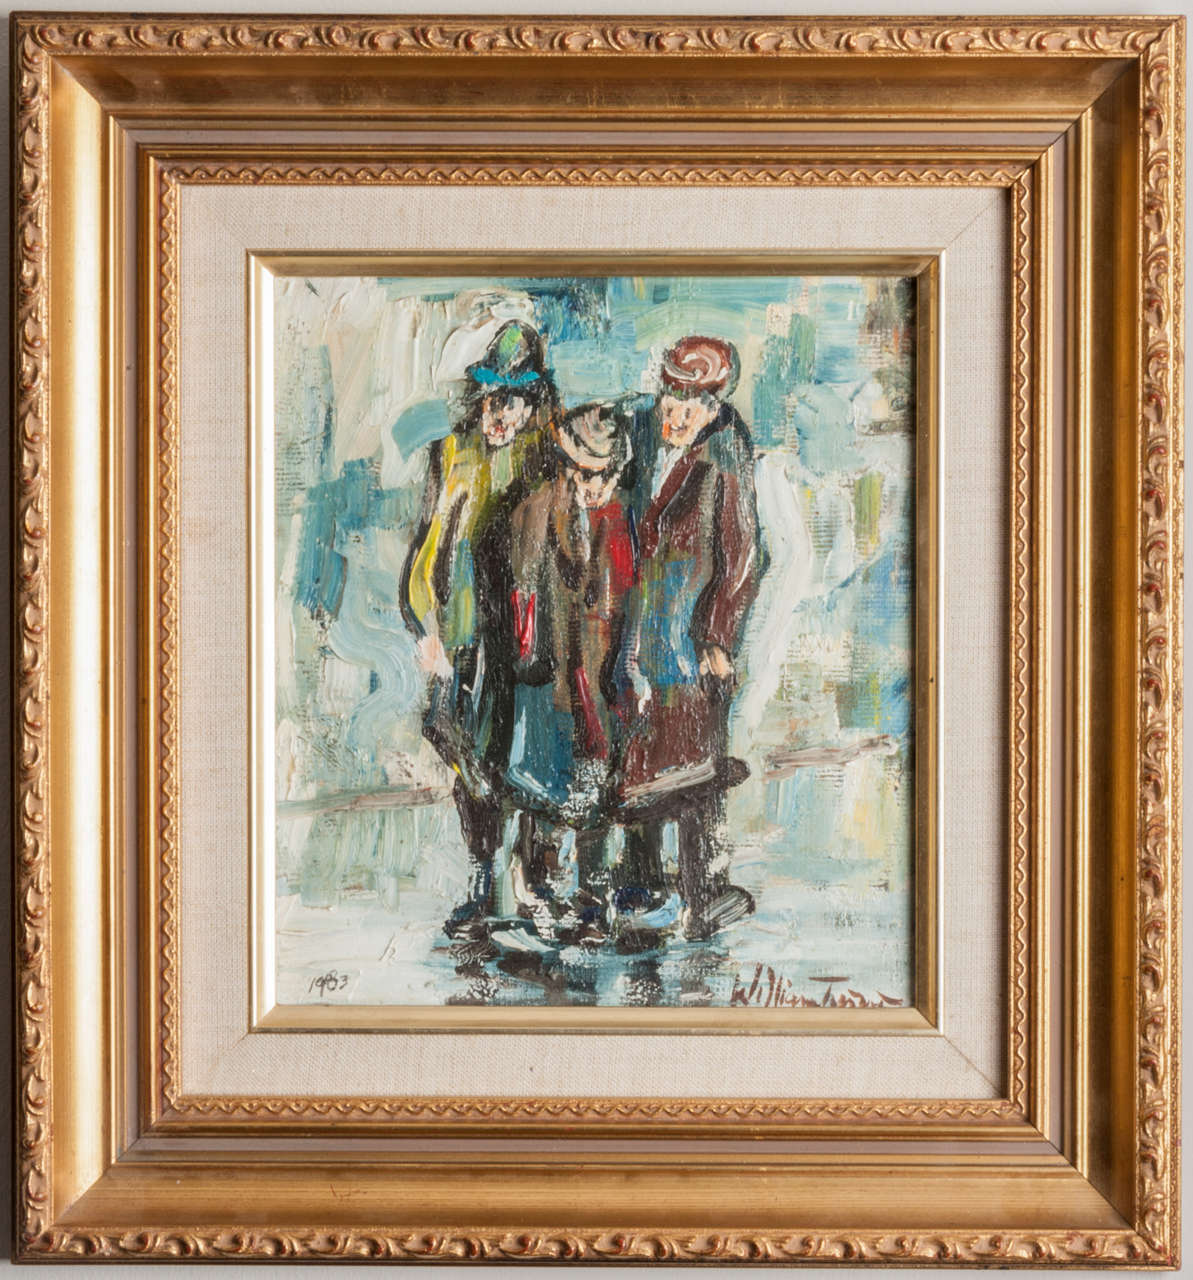 William Turner (Born Chorlton –on-Medlock 1920)
"Three Singers".
Signed and dated 1983.
Signed and inscribed verso and label verso.
Oil on Board.
Framed
21cms x 18.5cms
William Ralph Turner was born in Chorlton-on –Medlock in